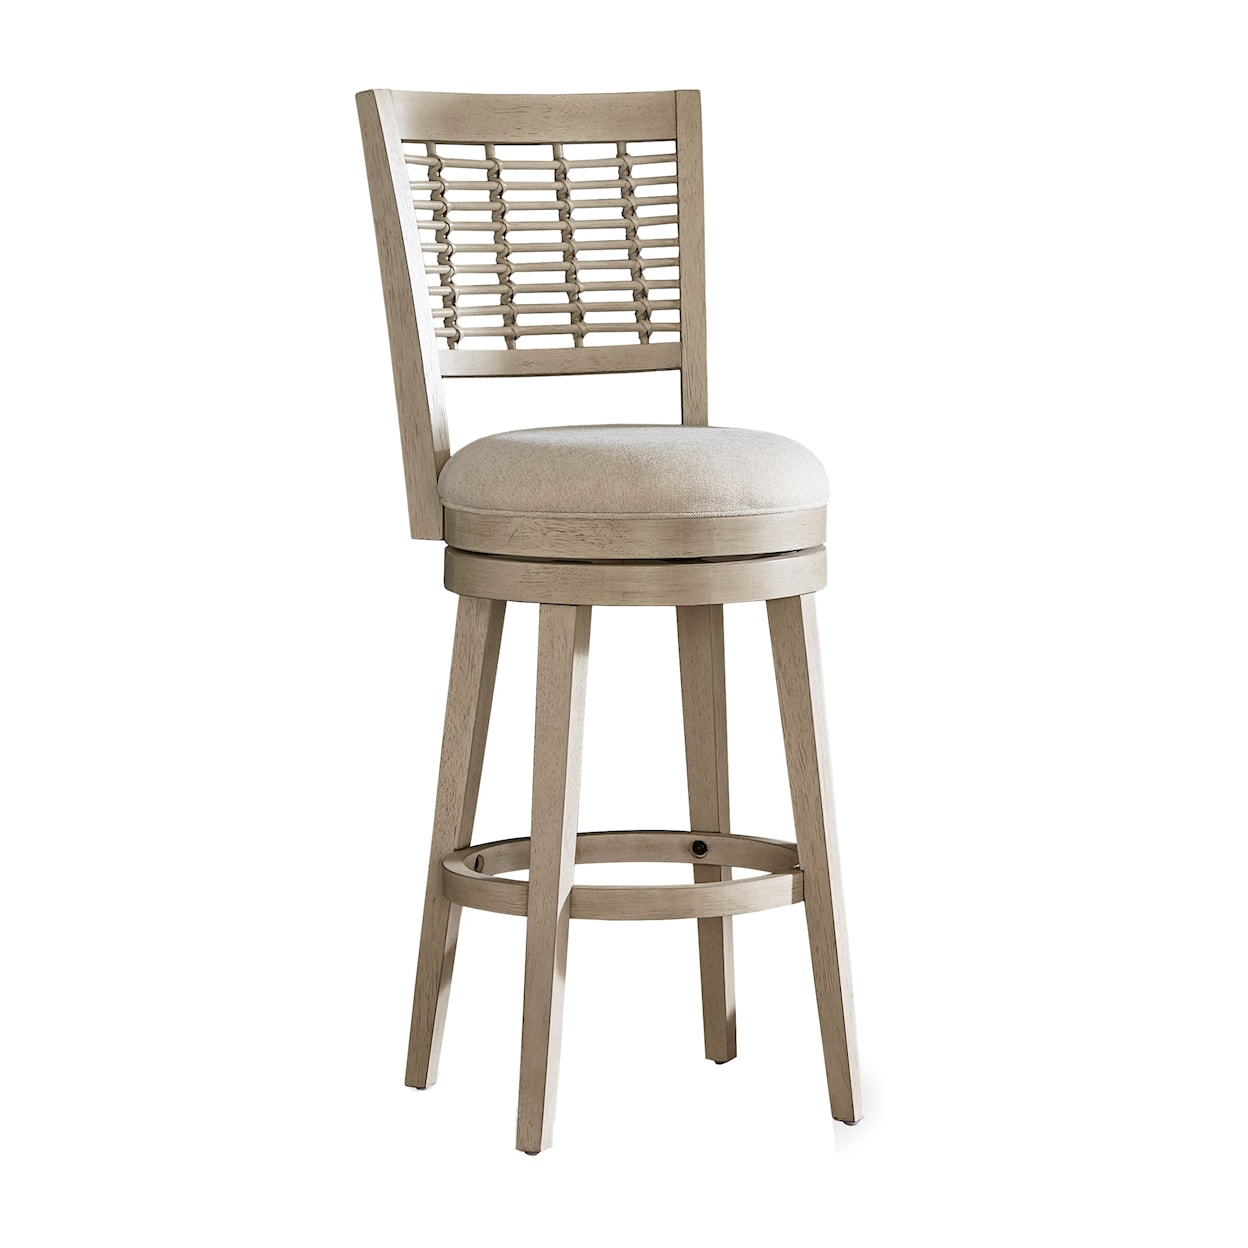 Hillsdale Ocala Counter and Bar Stools